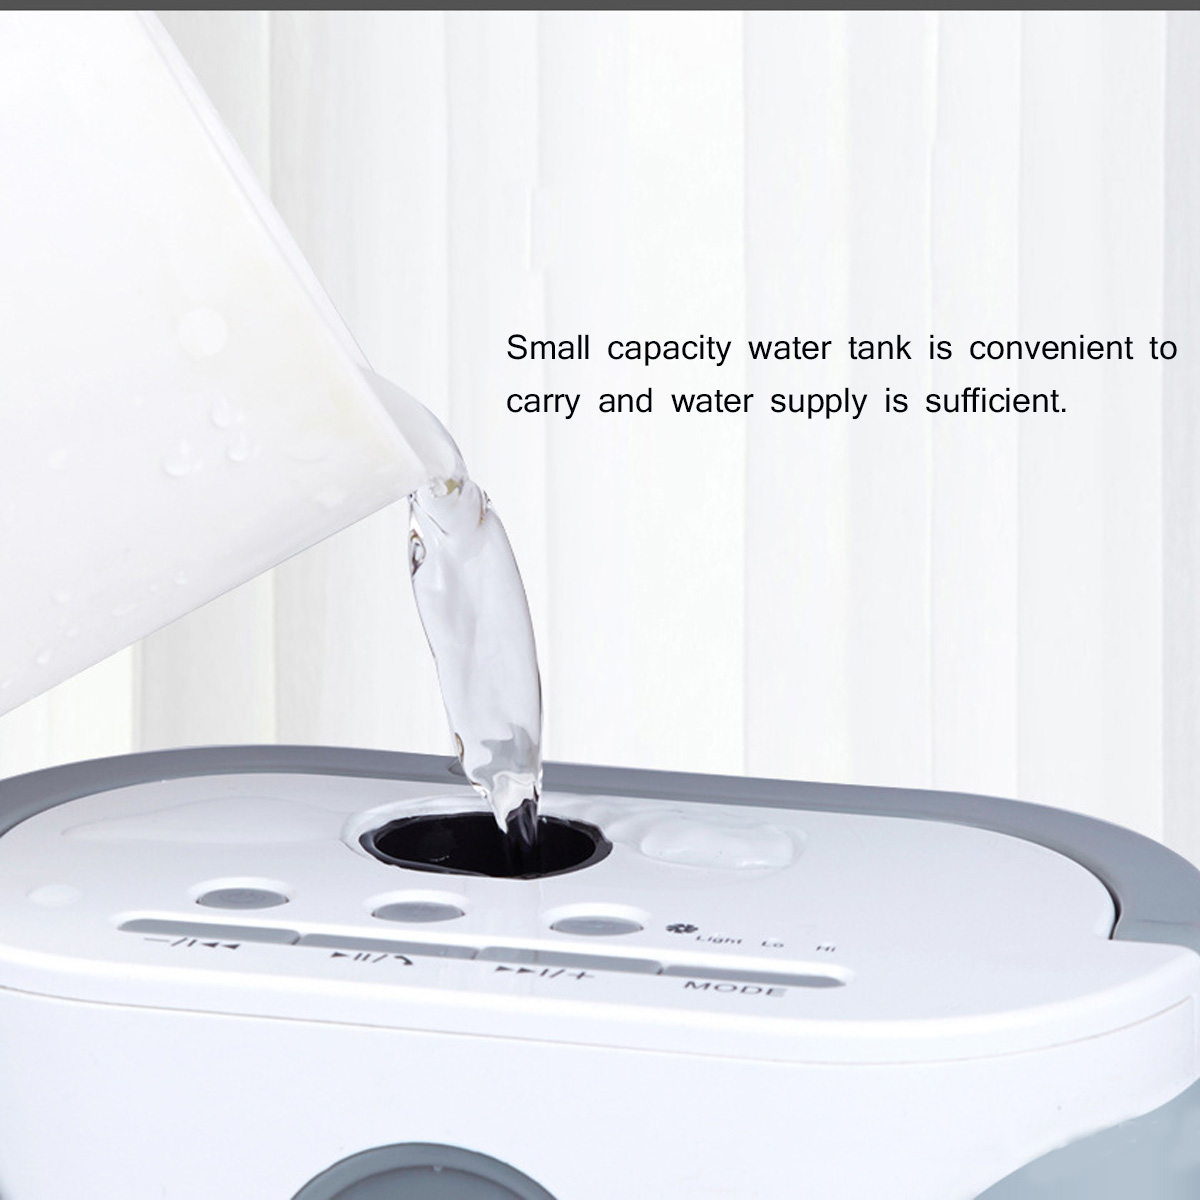 USB-Multifunction-Humidifier-Portable-Air-Conditioner-Fan-Cooling-bluetooth-Speaker-Gifts-for-Family-1675300-11